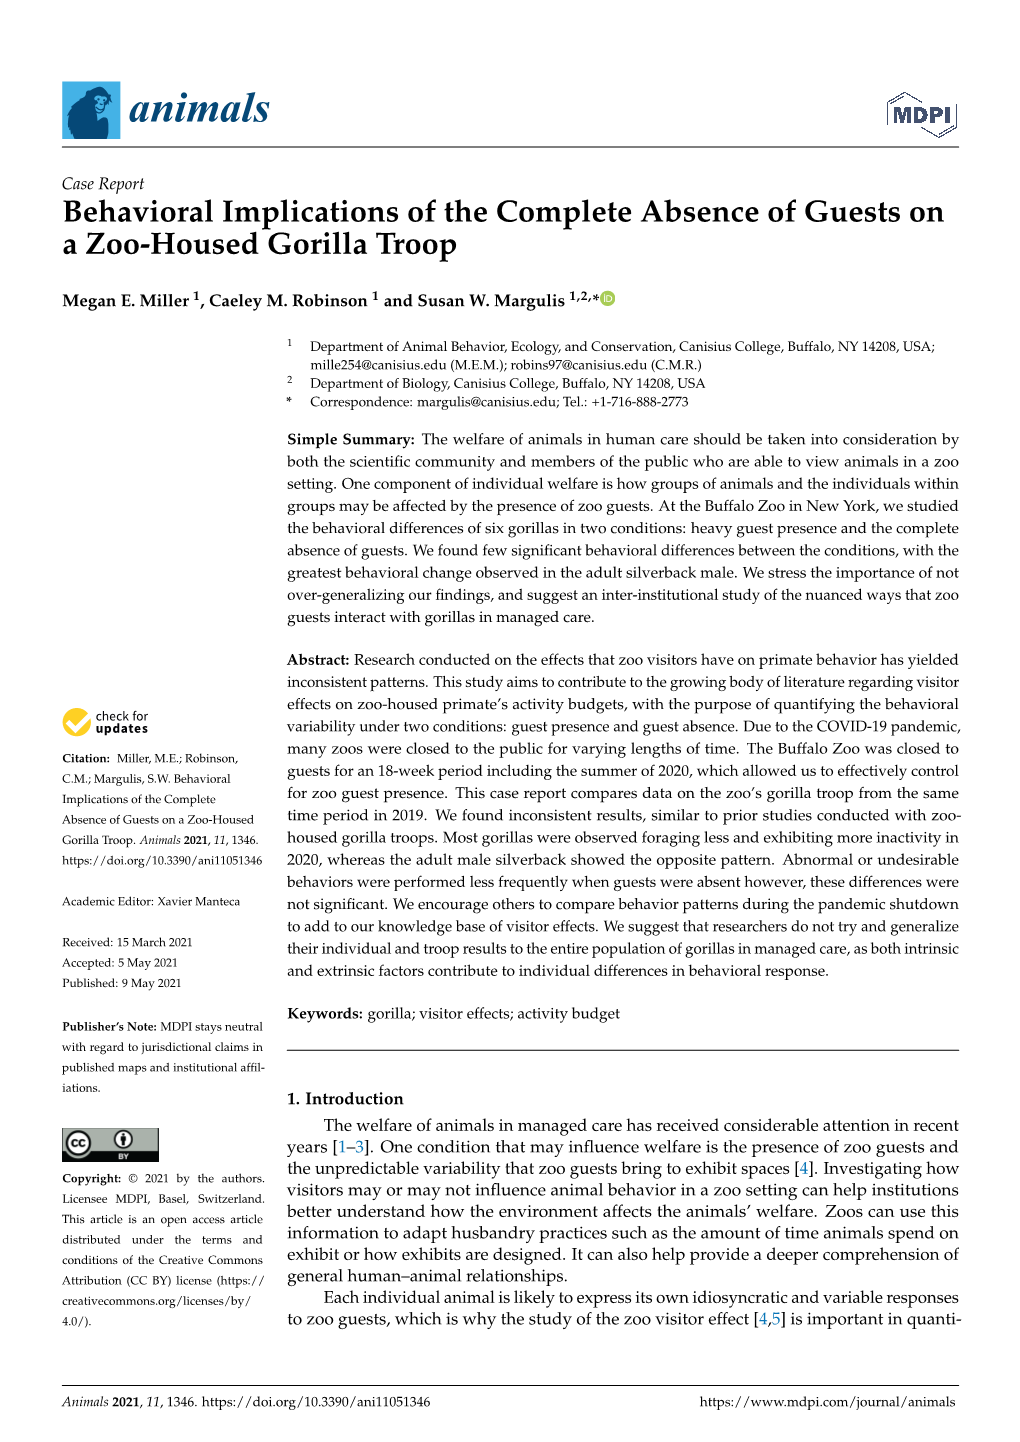 Behavioral Implications of the Complete Absence of Guests on a Zoo-Housed Gorilla Troop